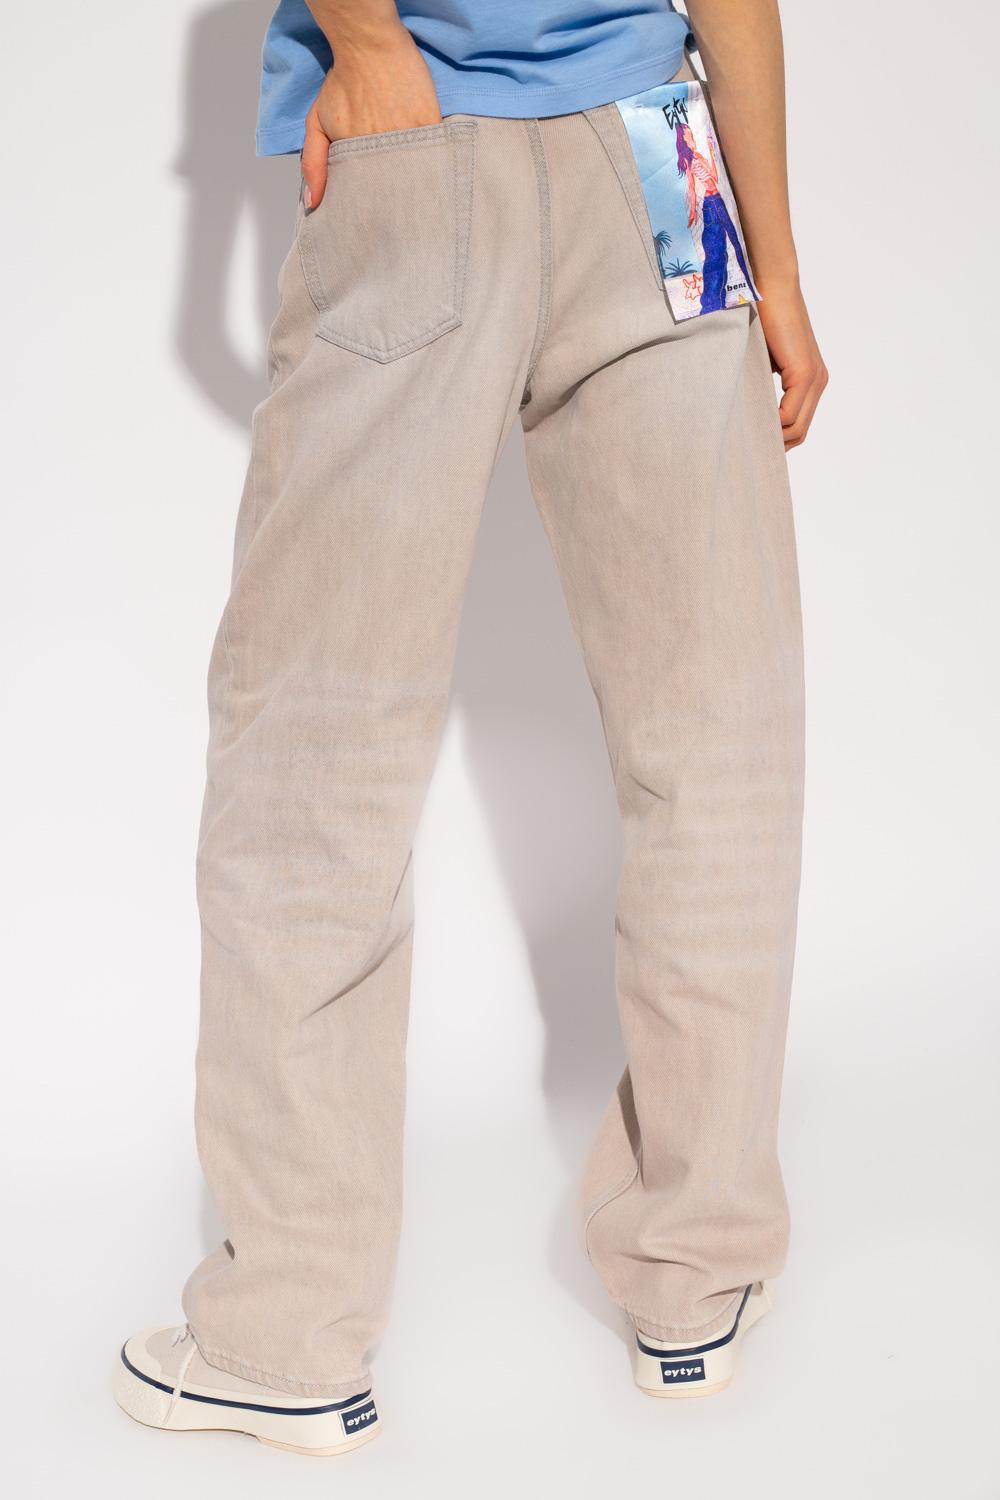 Eytys 'benz' Baggy Jeans in Natural | Lyst